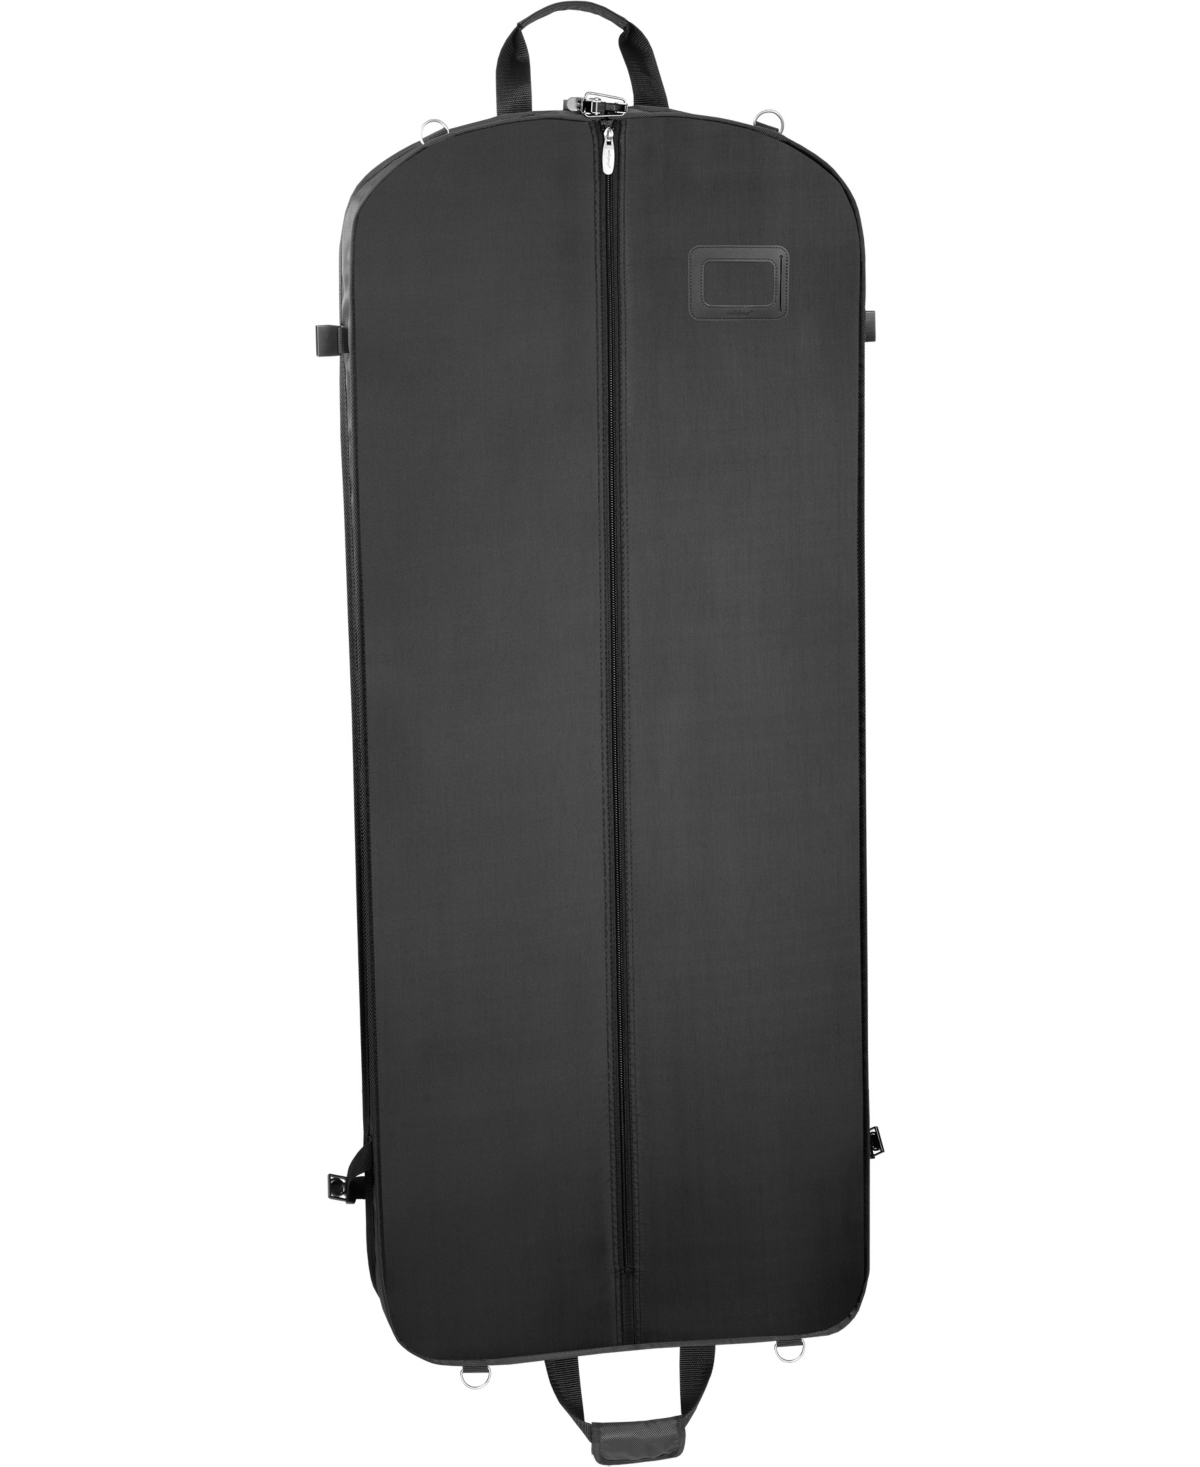 Wallybags 52" Premium Travel Garment Bag With Shoulder Strap And Two Large Pockets In Black